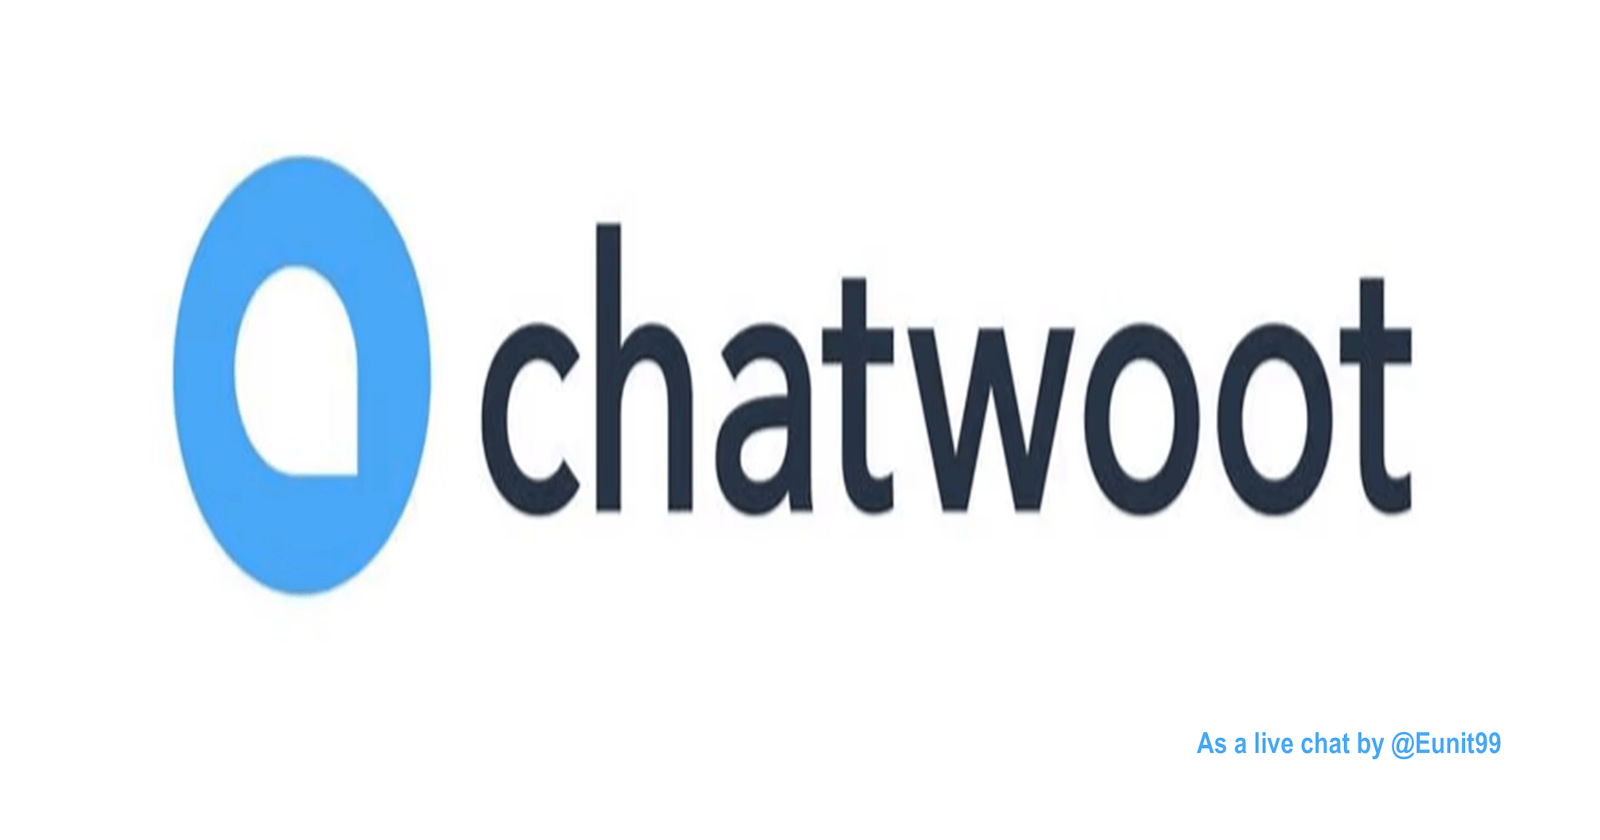 How to use Chatwoot as a Live Chat Feature in your Web Application